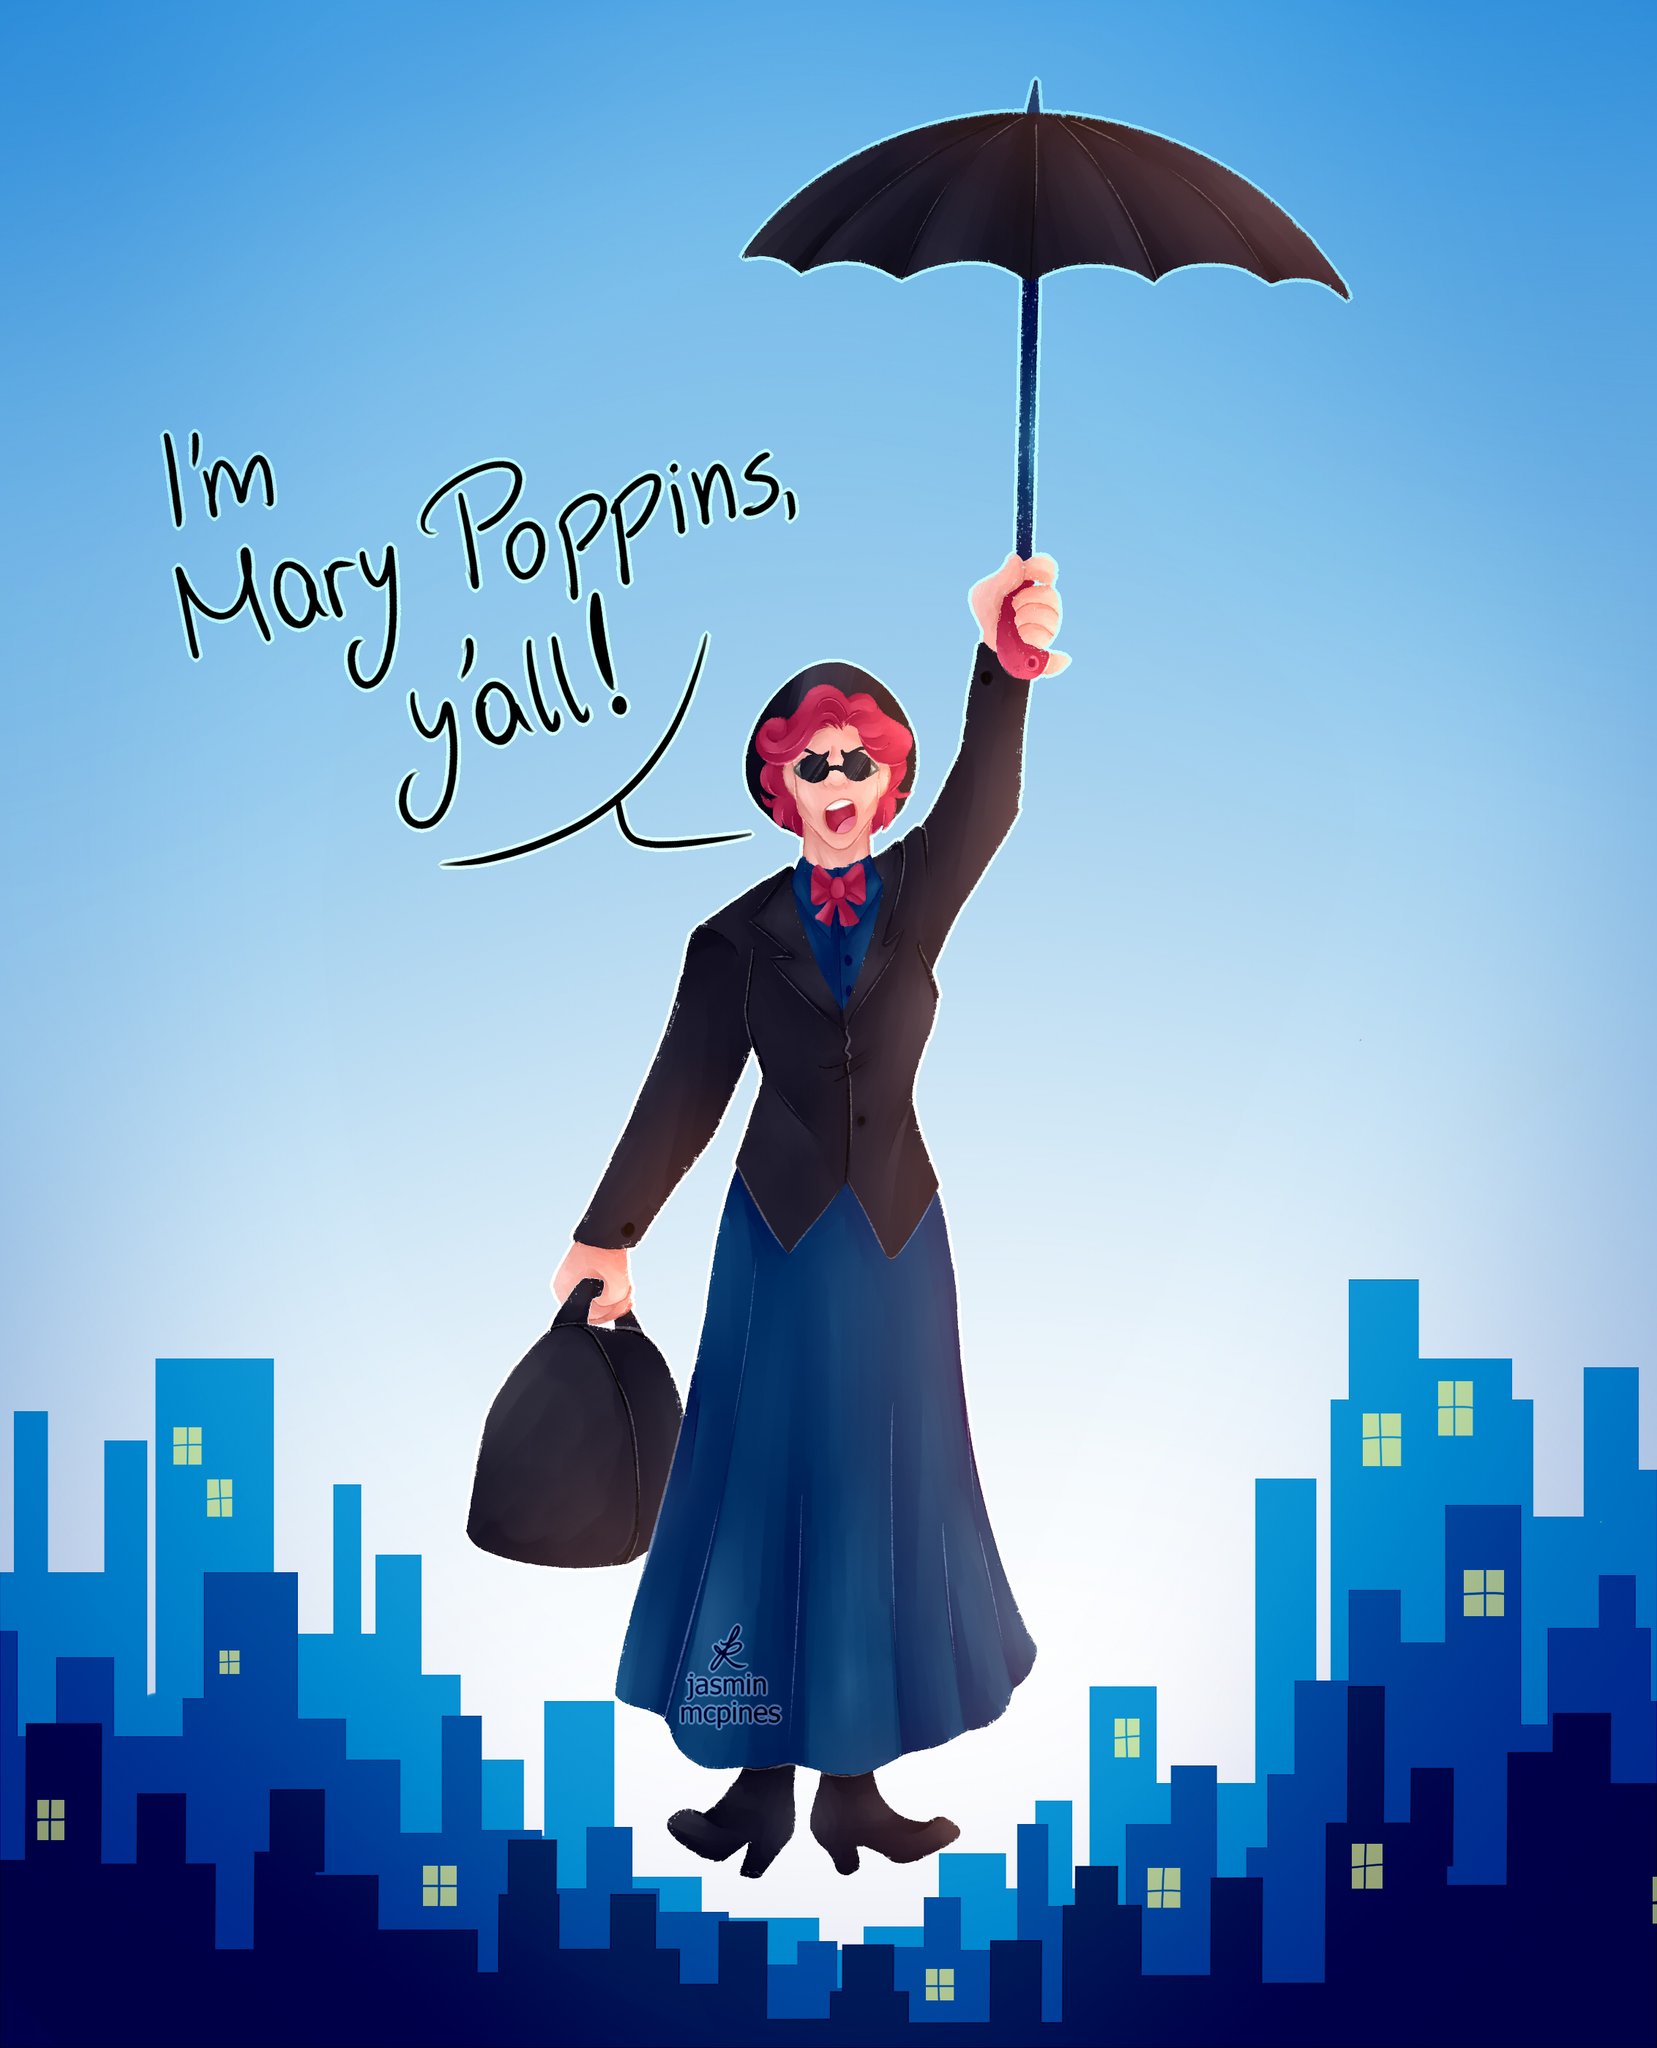 “Yall know where this is from ;) Inspired by the Mary Poppins Broadway cove...